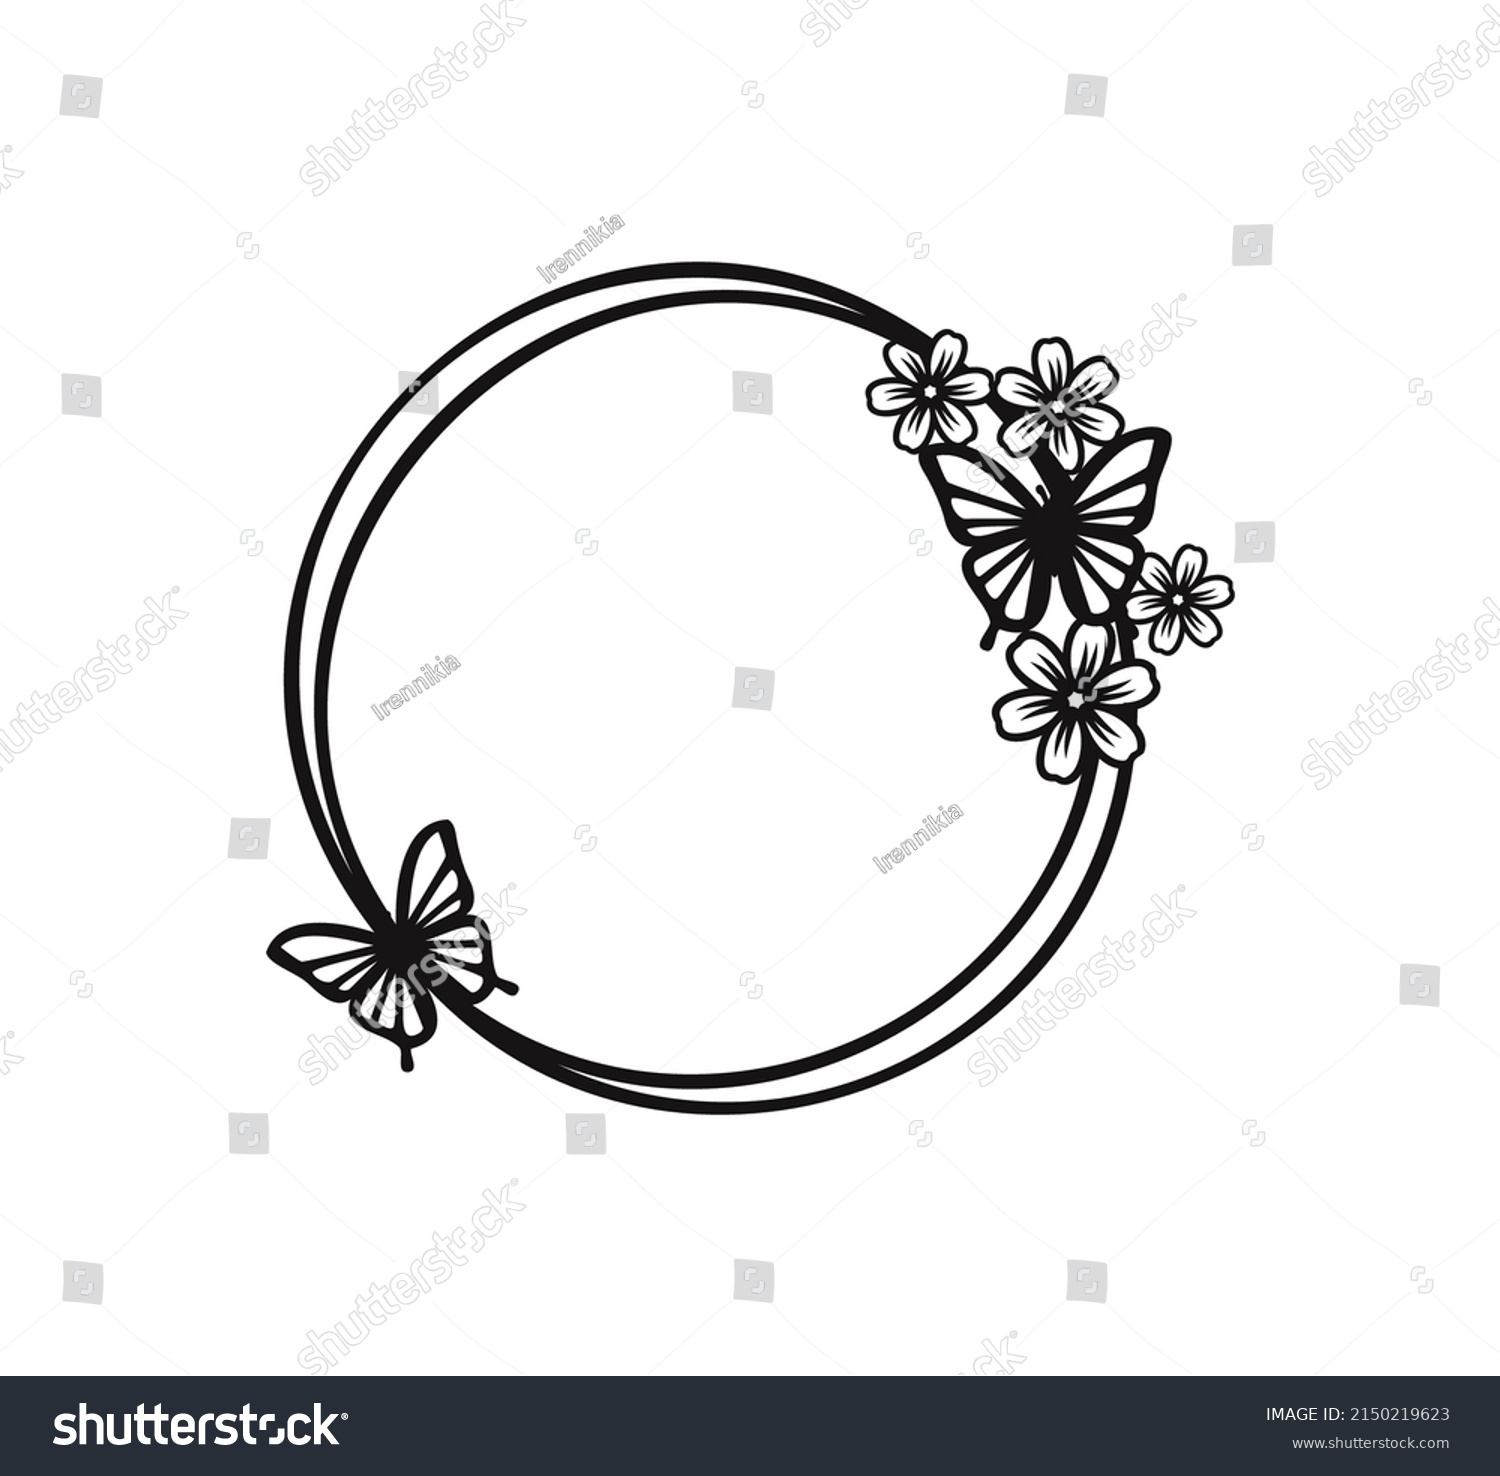 SVG of Frame in the shape of a circle with flowers and butterfly. Floral Frame. Suitable for cutting machine  svg